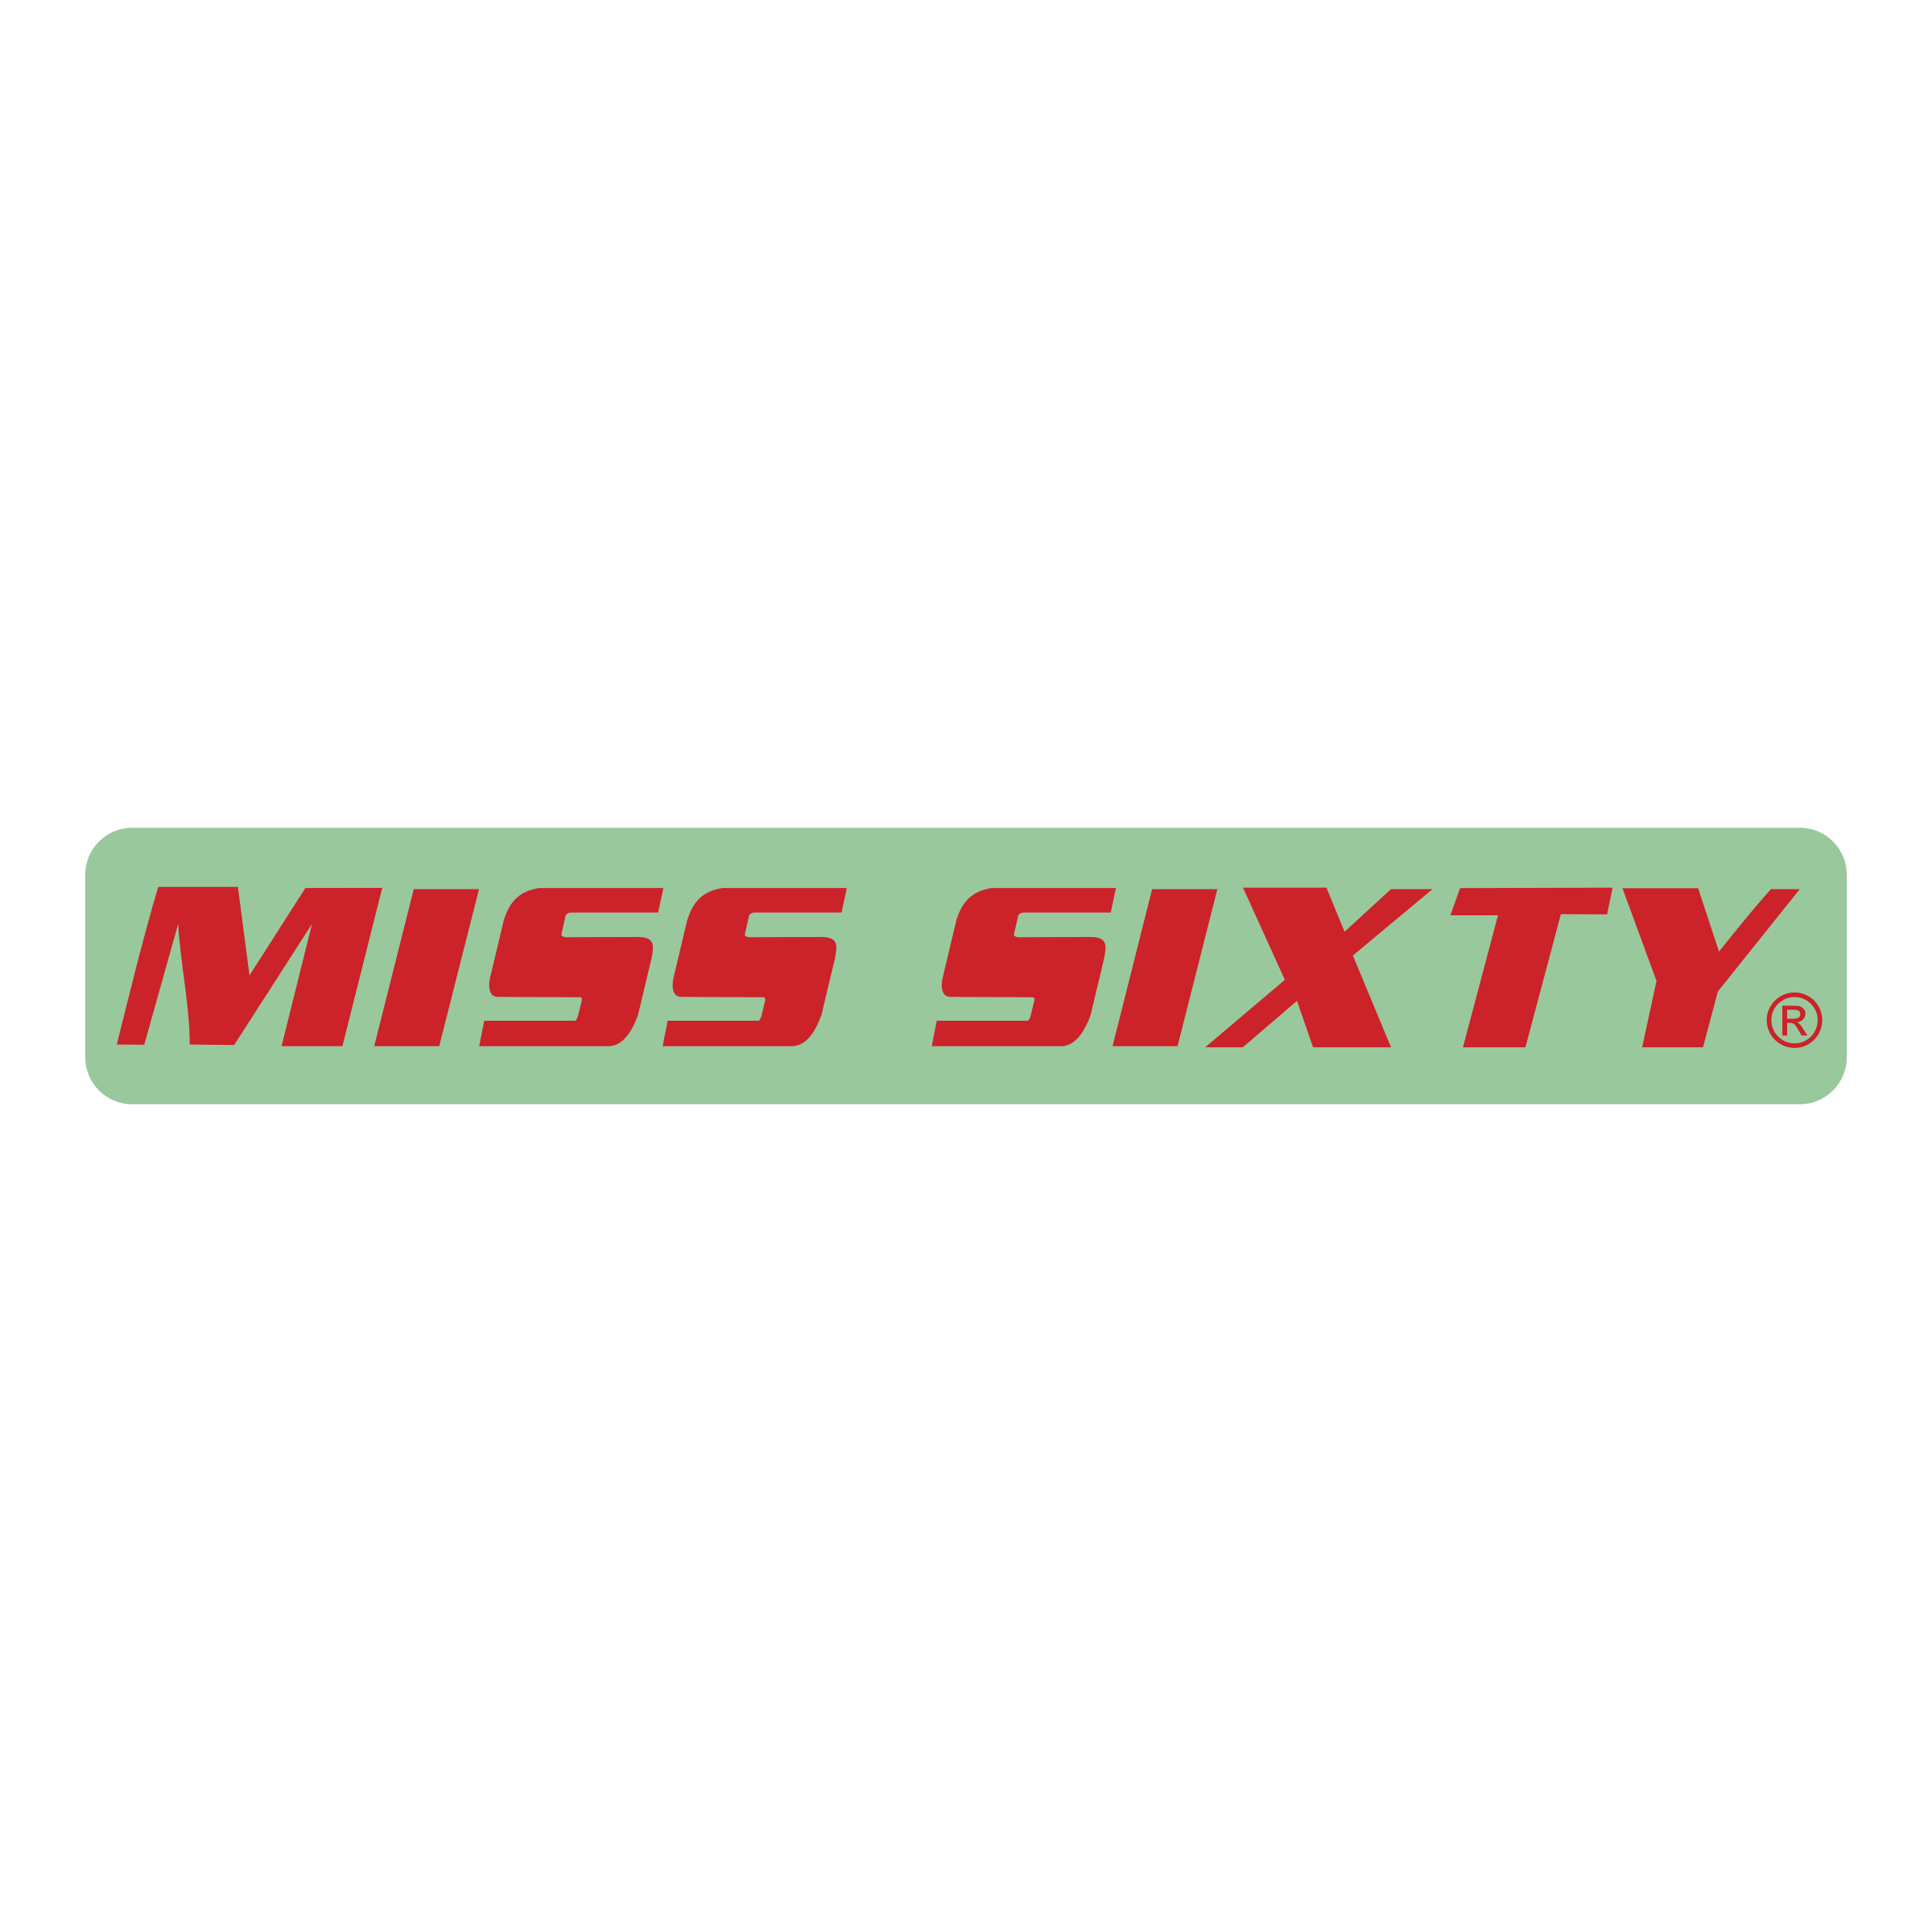 Inspiration - Miss Sixty Logo Facts, Meaning, History & PNG ...